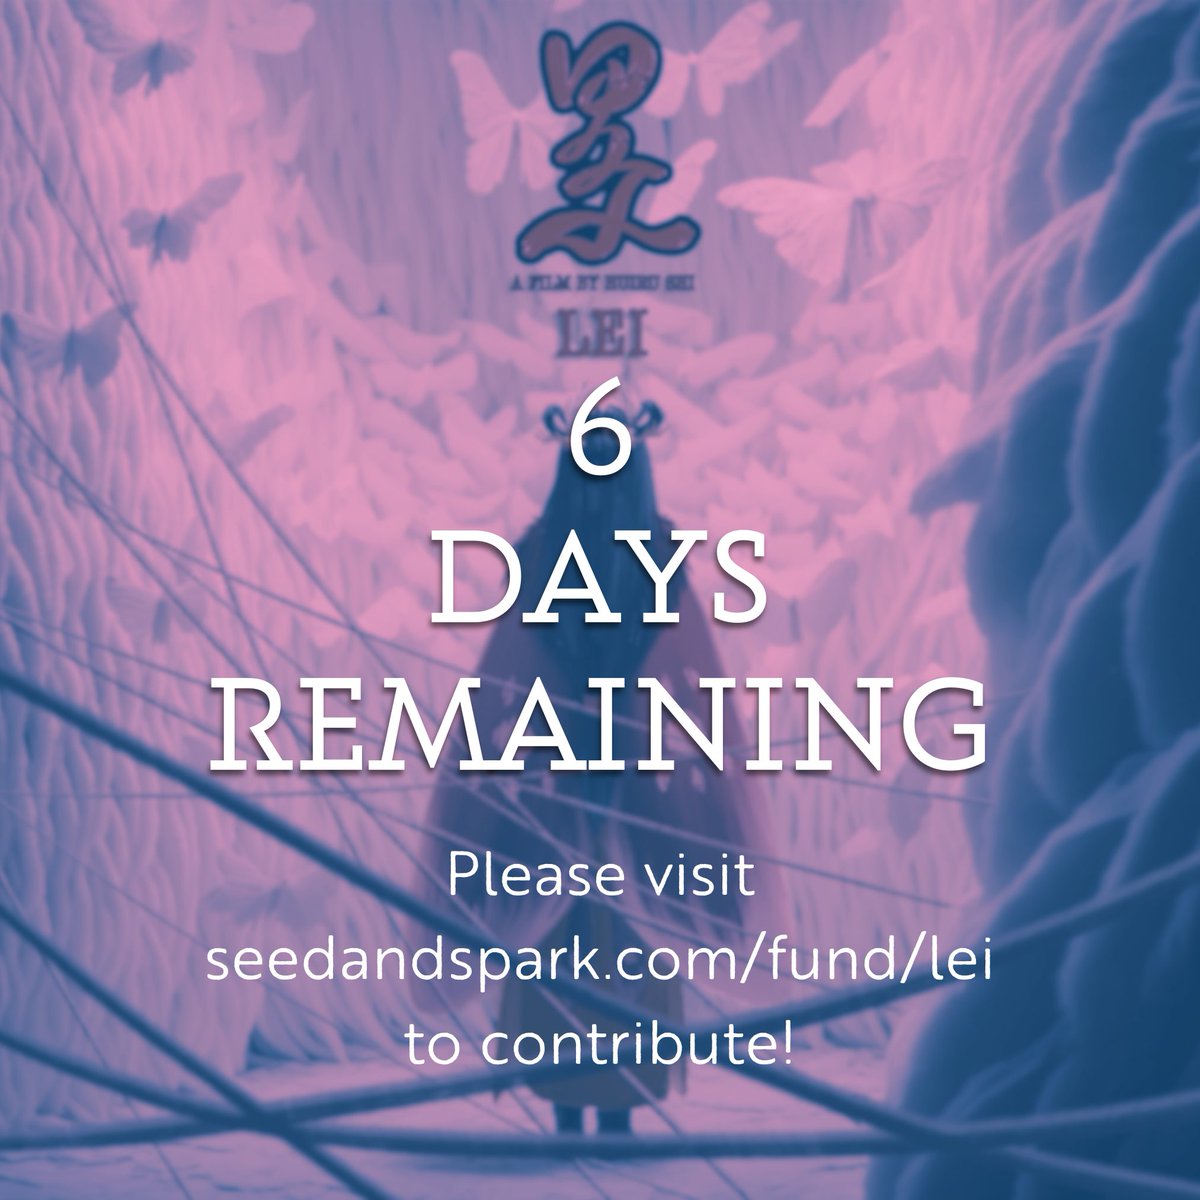 With only 6 days remaining, make sure if you’ve been waiting to contribute to do it before it’s too late!! 🧶🧵 Link in bio